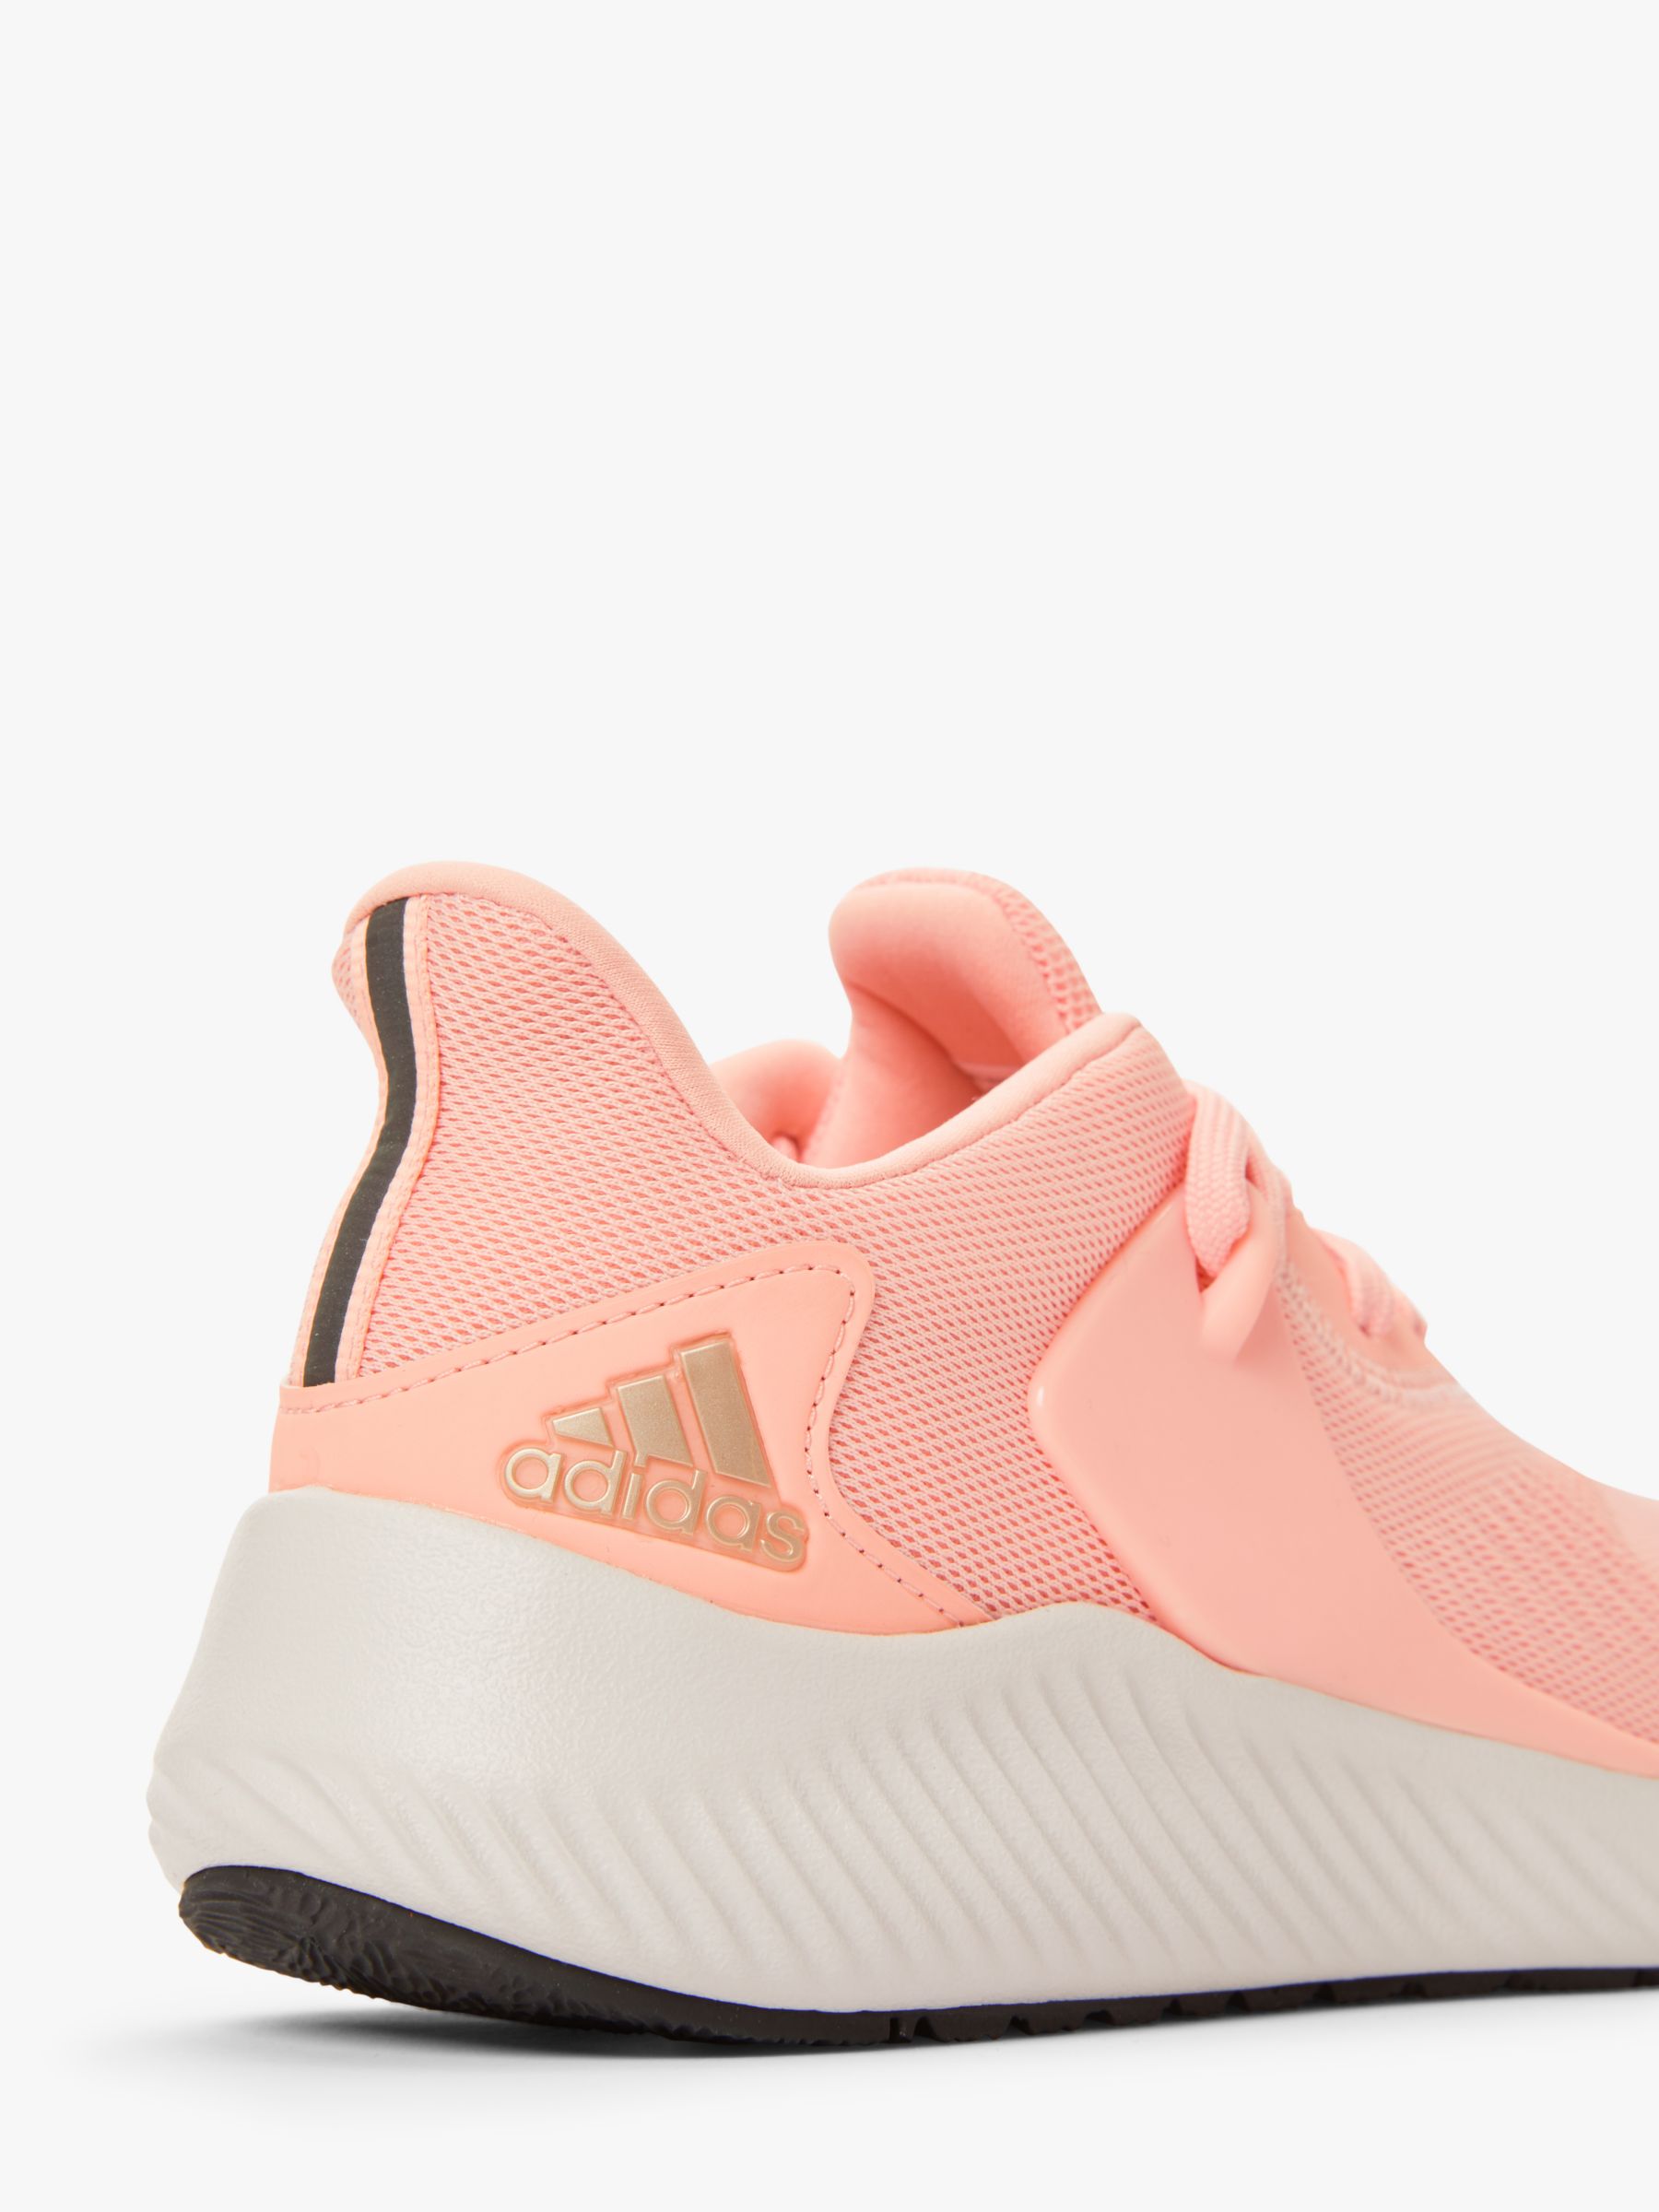 adidas alphabounce rc 2 ladies running shoes